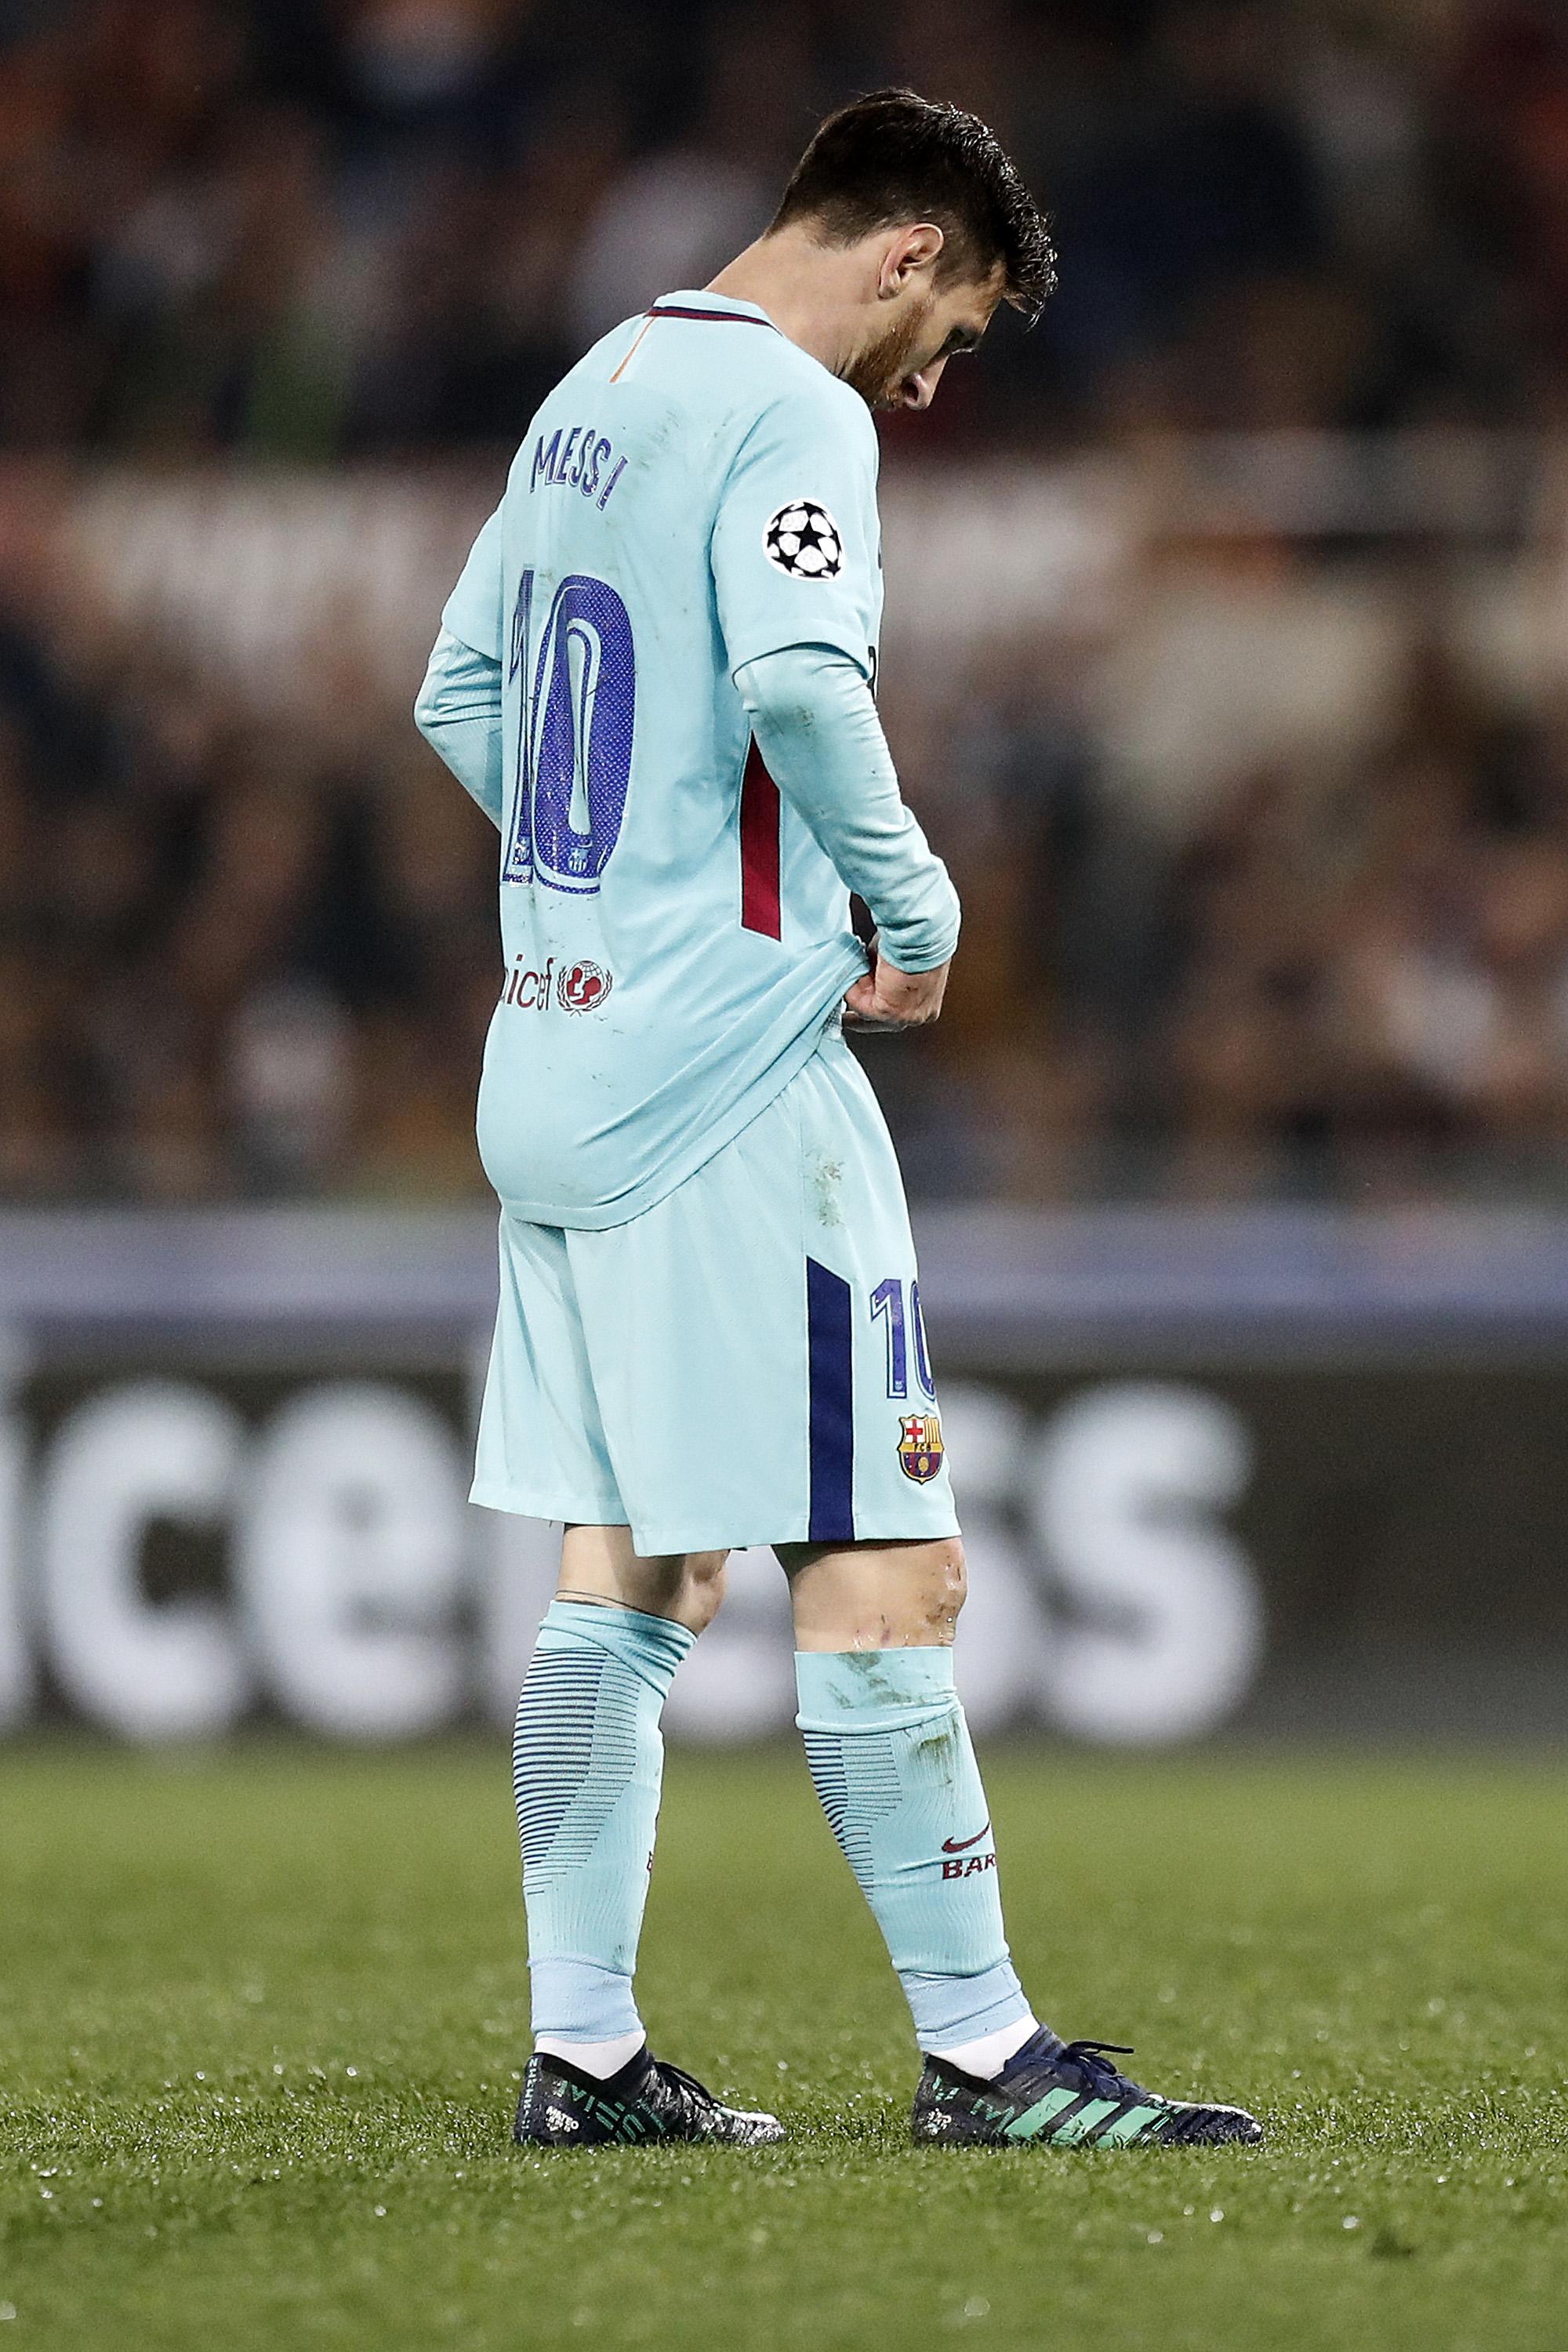 Barcelona's Lionel Messi shows his dejection during Champions League quarter-final second leg soccer match between AS Roma and FC Barcelona at the Olimpico Stadium, Rome, Italy, 10 April 2018. ANSA/RICCARDO ANTIMIANI